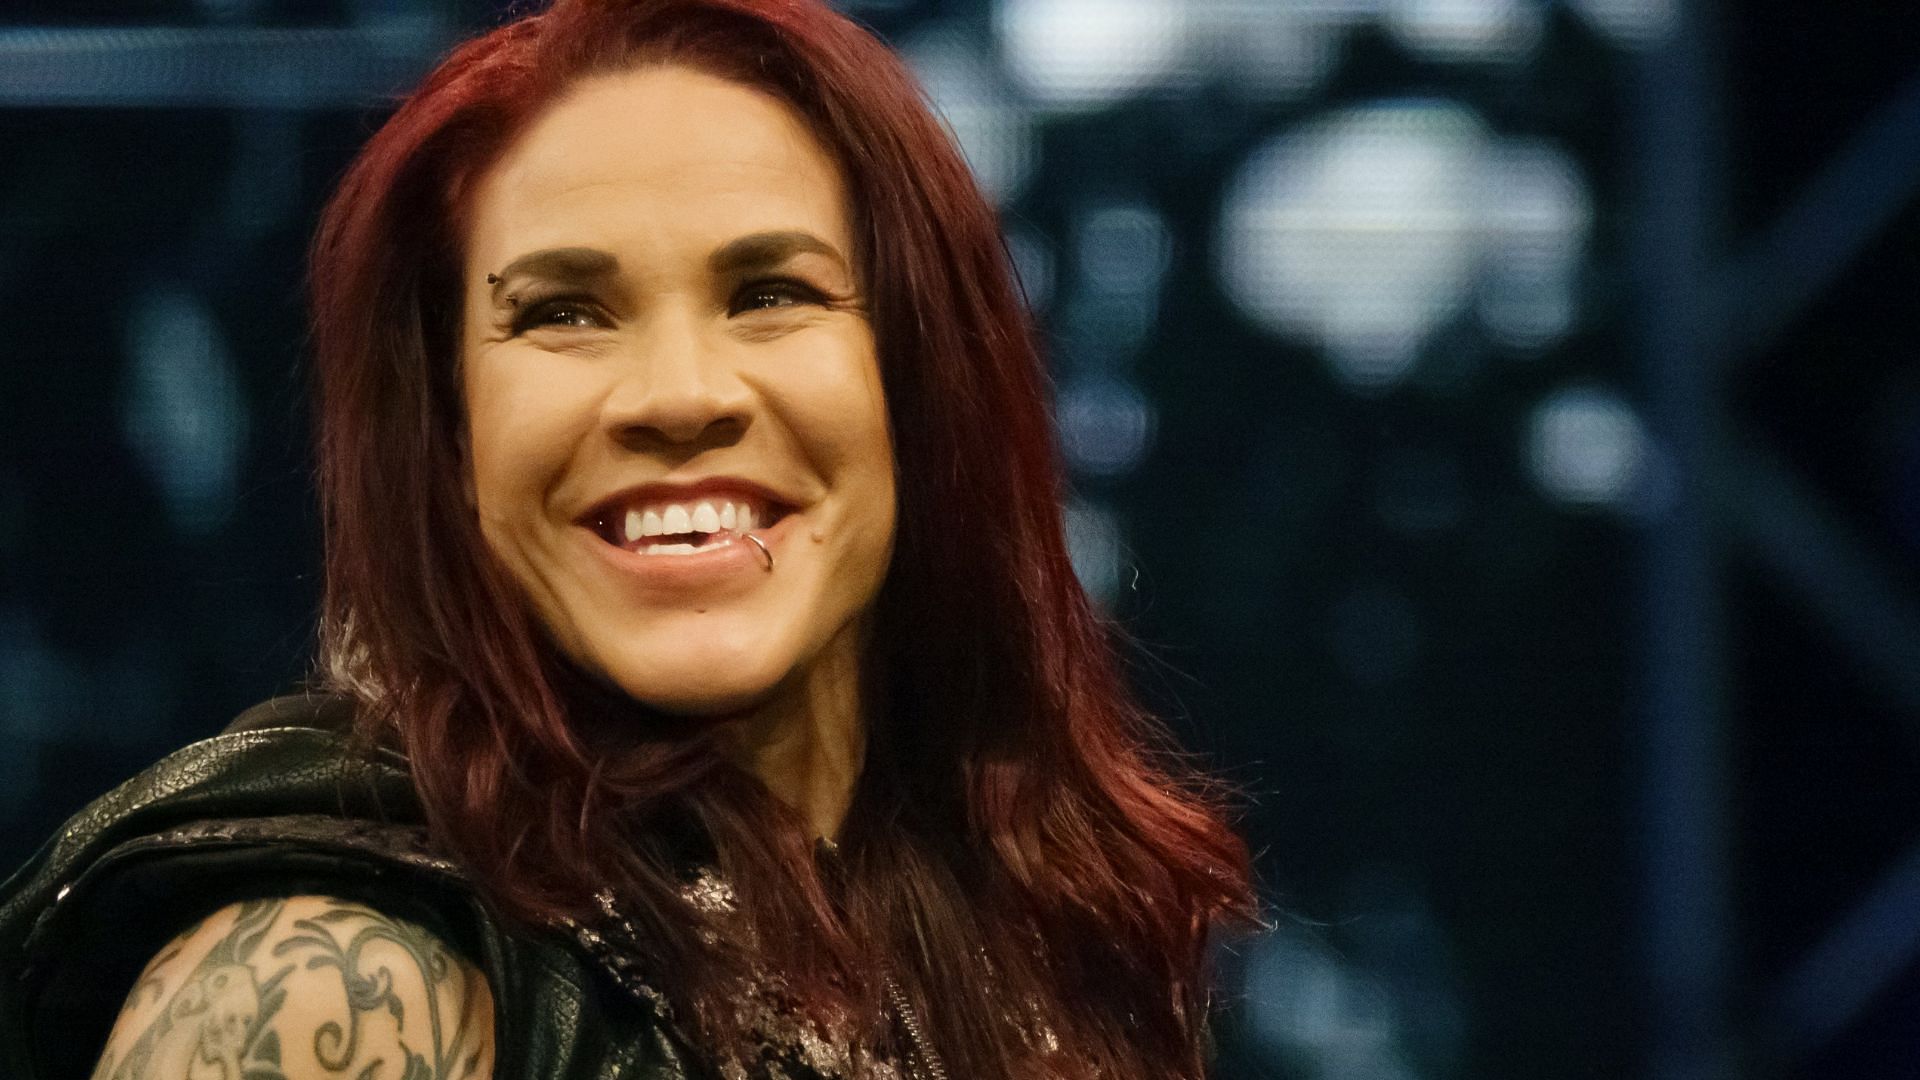 Mercedes Martinez at ROH Supercard of Honor 2022